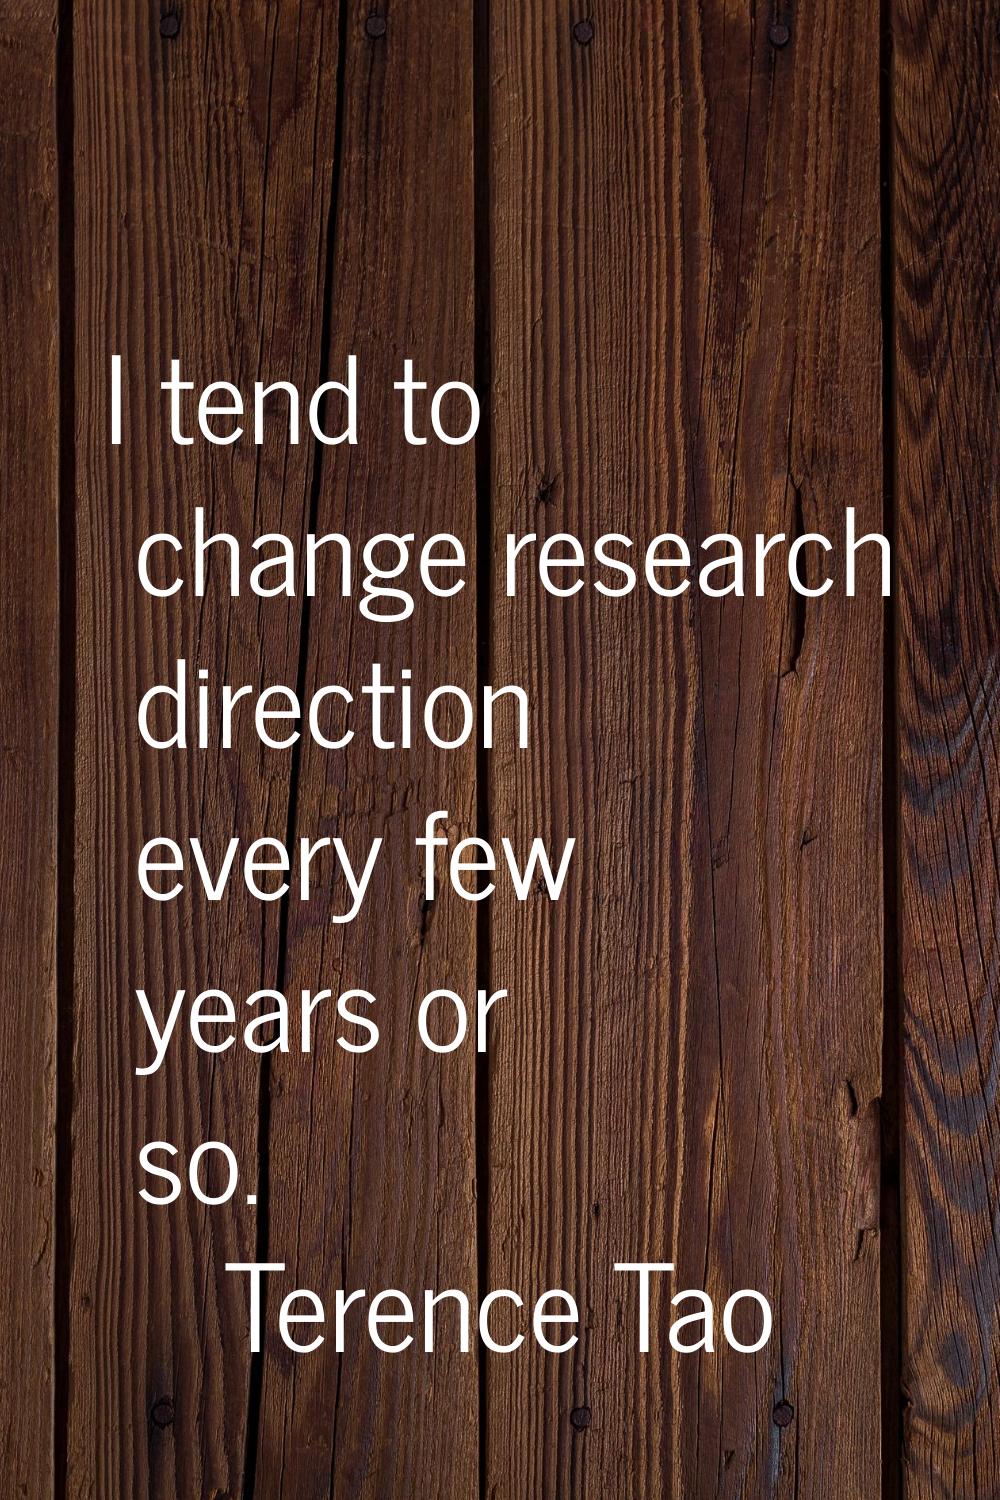 I tend to change research direction every few years or so.